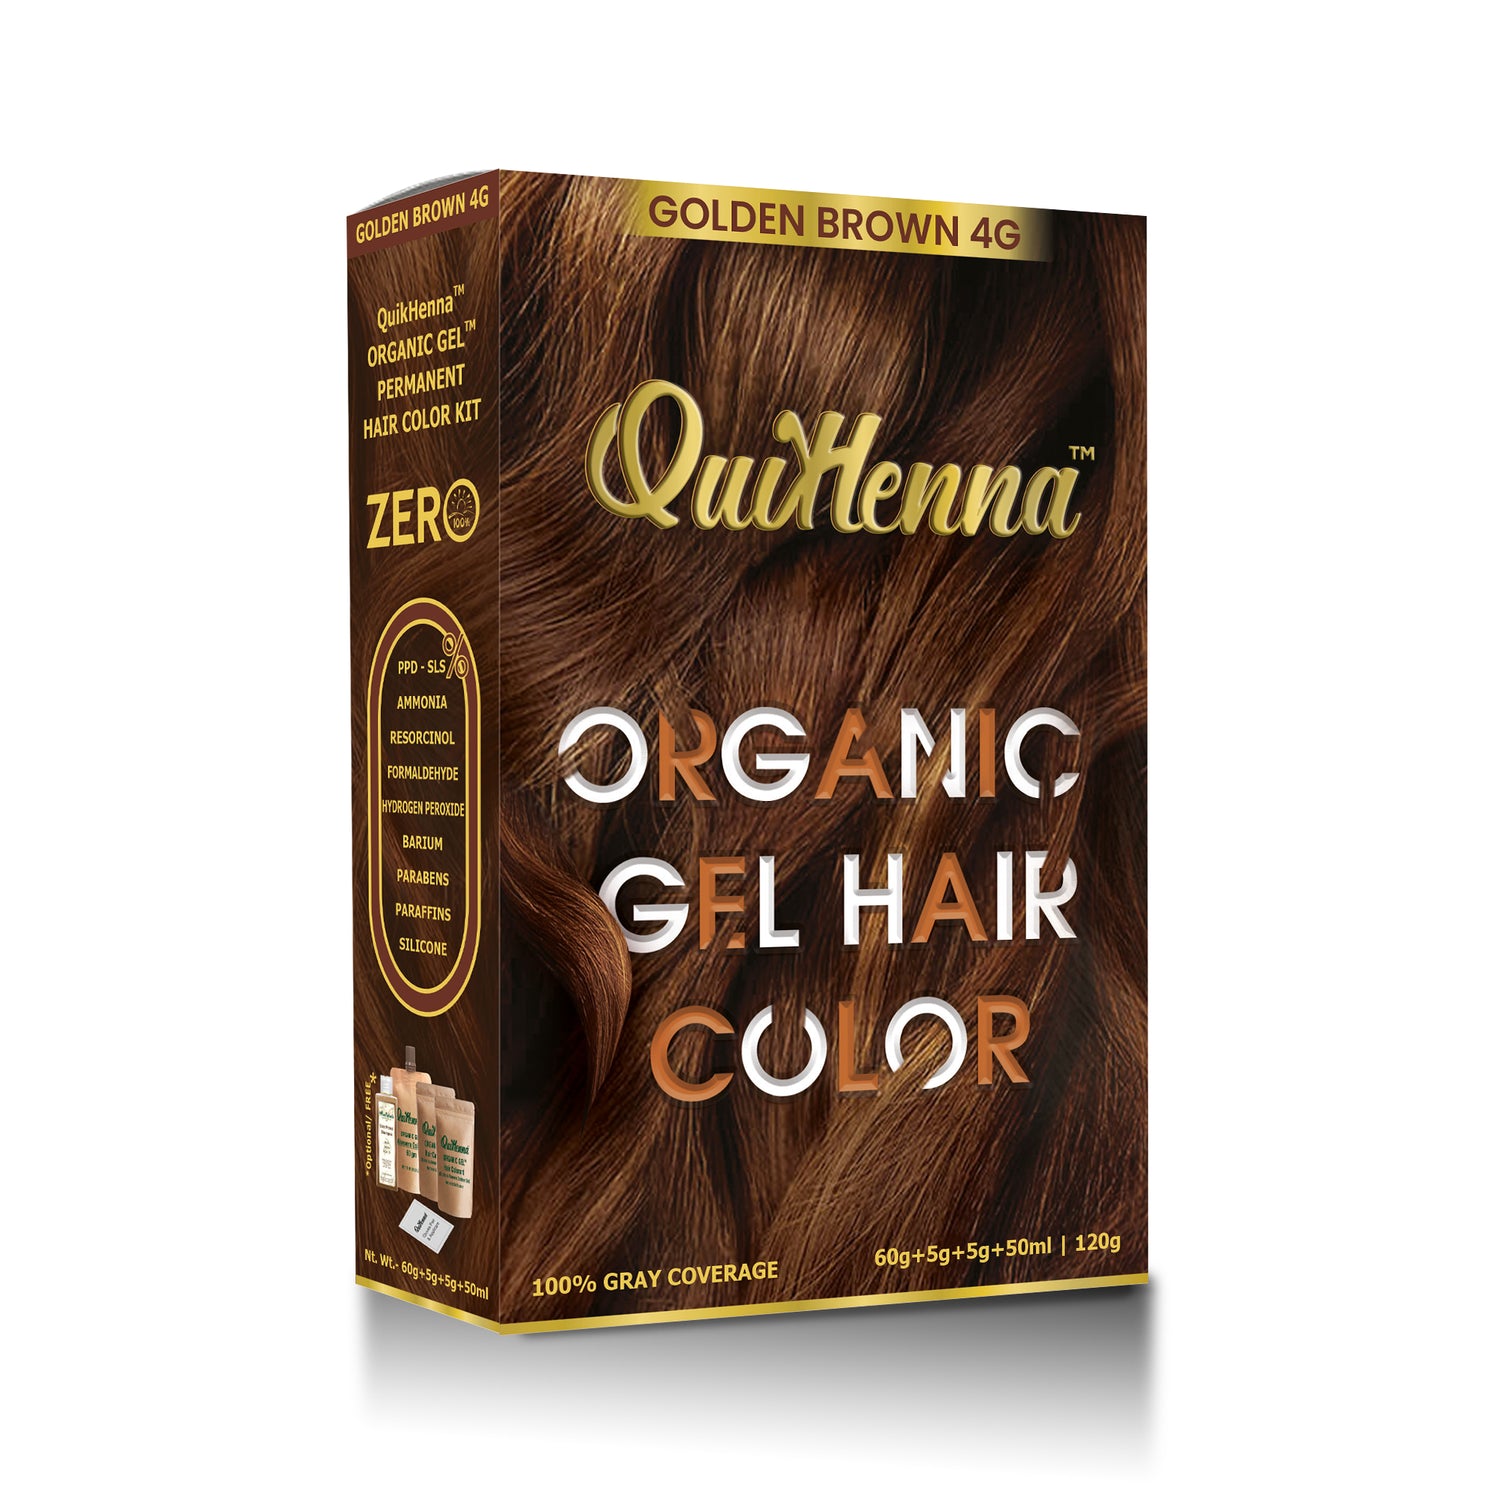 QuikHenna Organic Gel Hair Colour for men and women golden brown ammonia and ppd free color